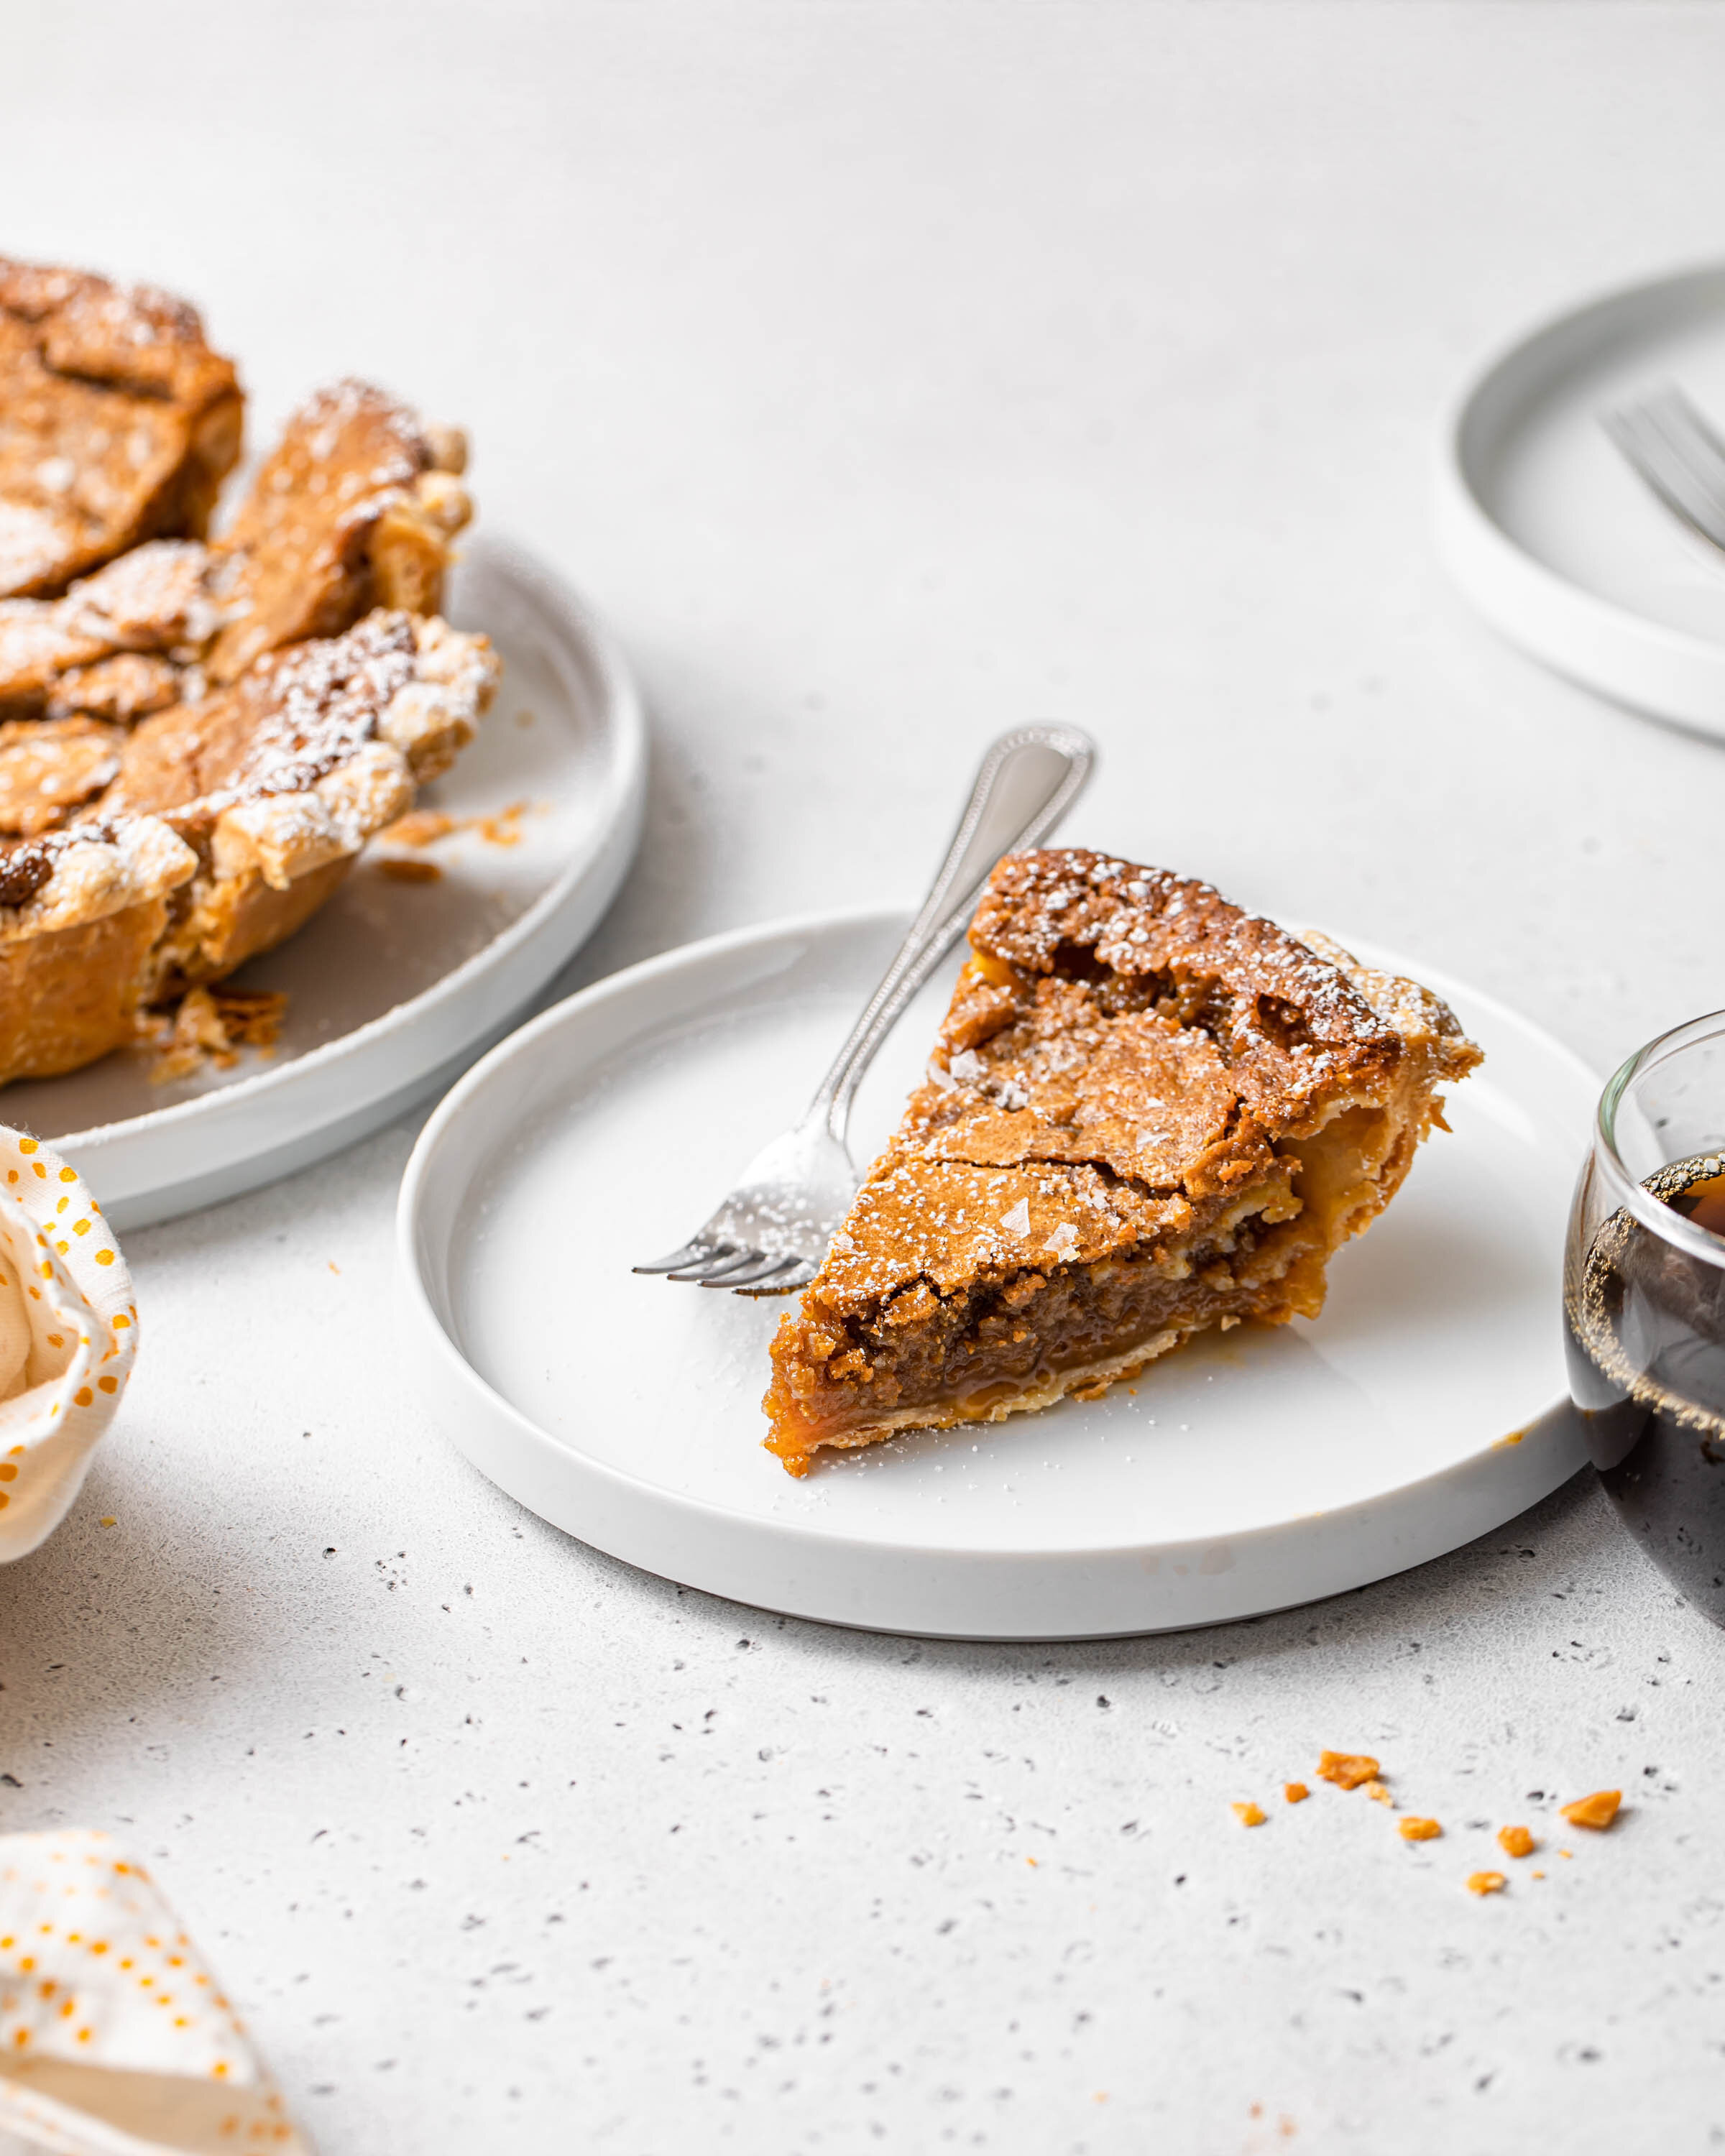 Slice of maple sugar pie with flaky crust and gooey brown sugar filling.